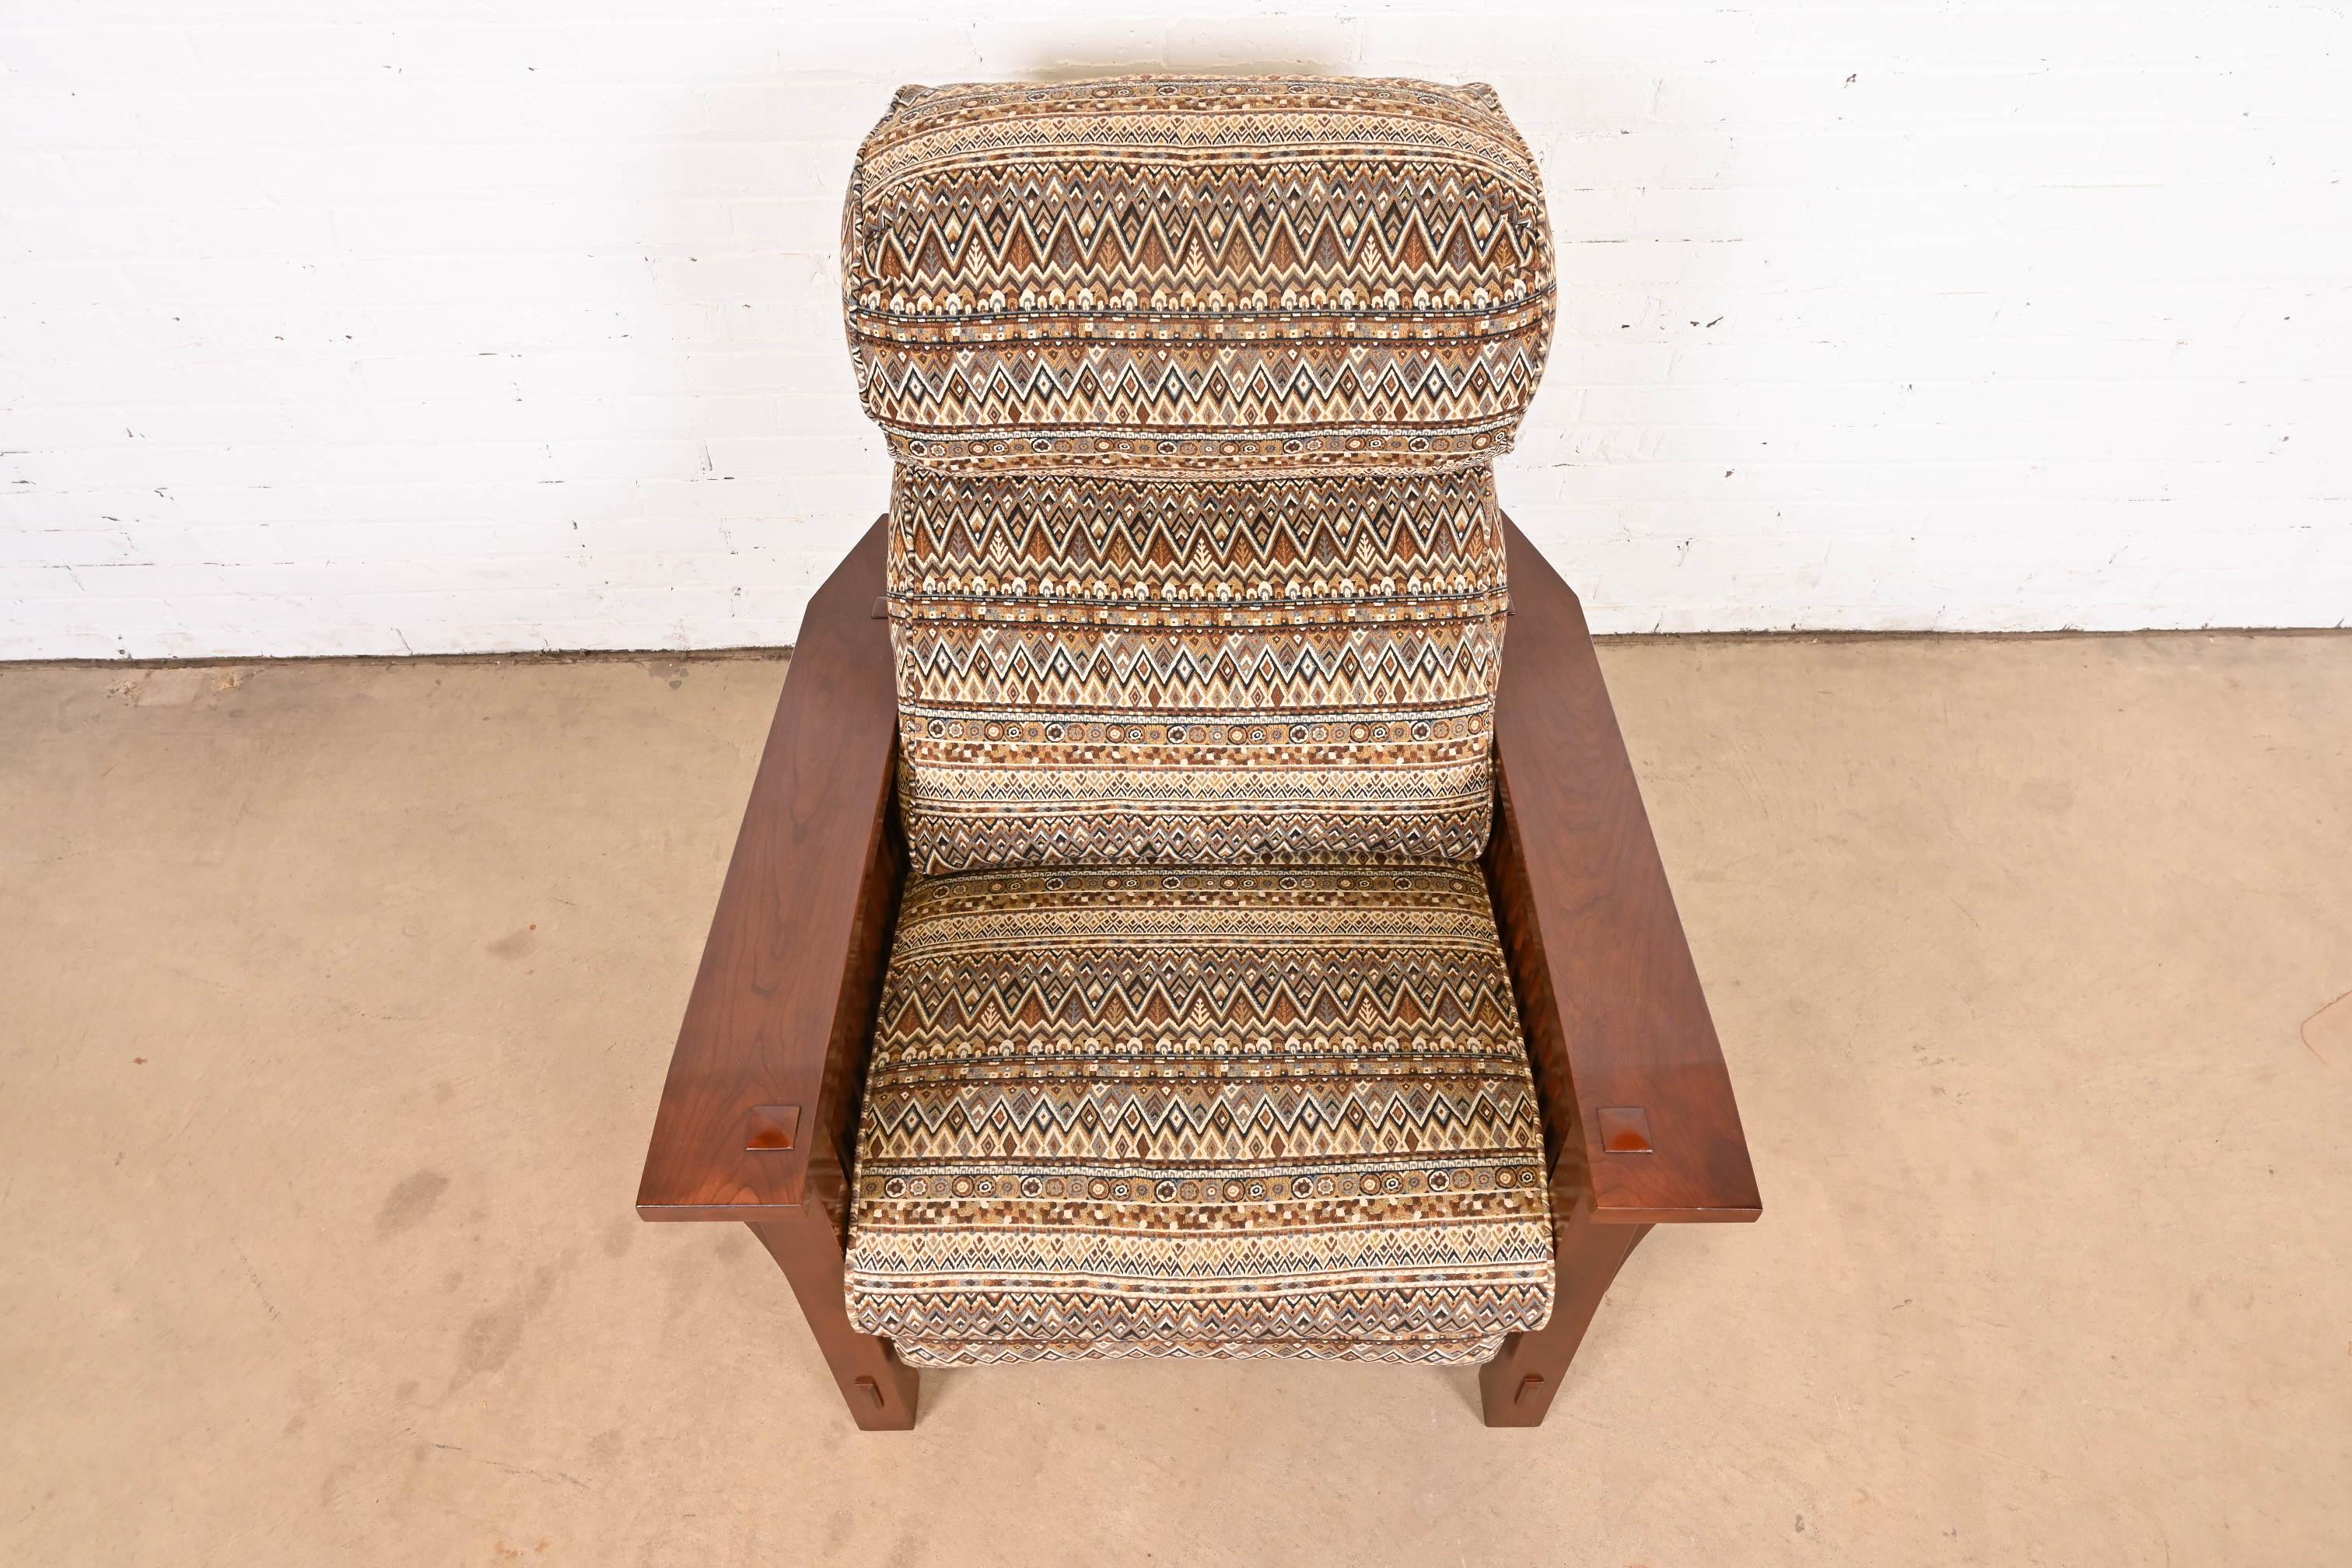 Upholstery Stickley Mission Arts & Crafts Cherry Wood Spindle Reclining Morris Lounge Chair